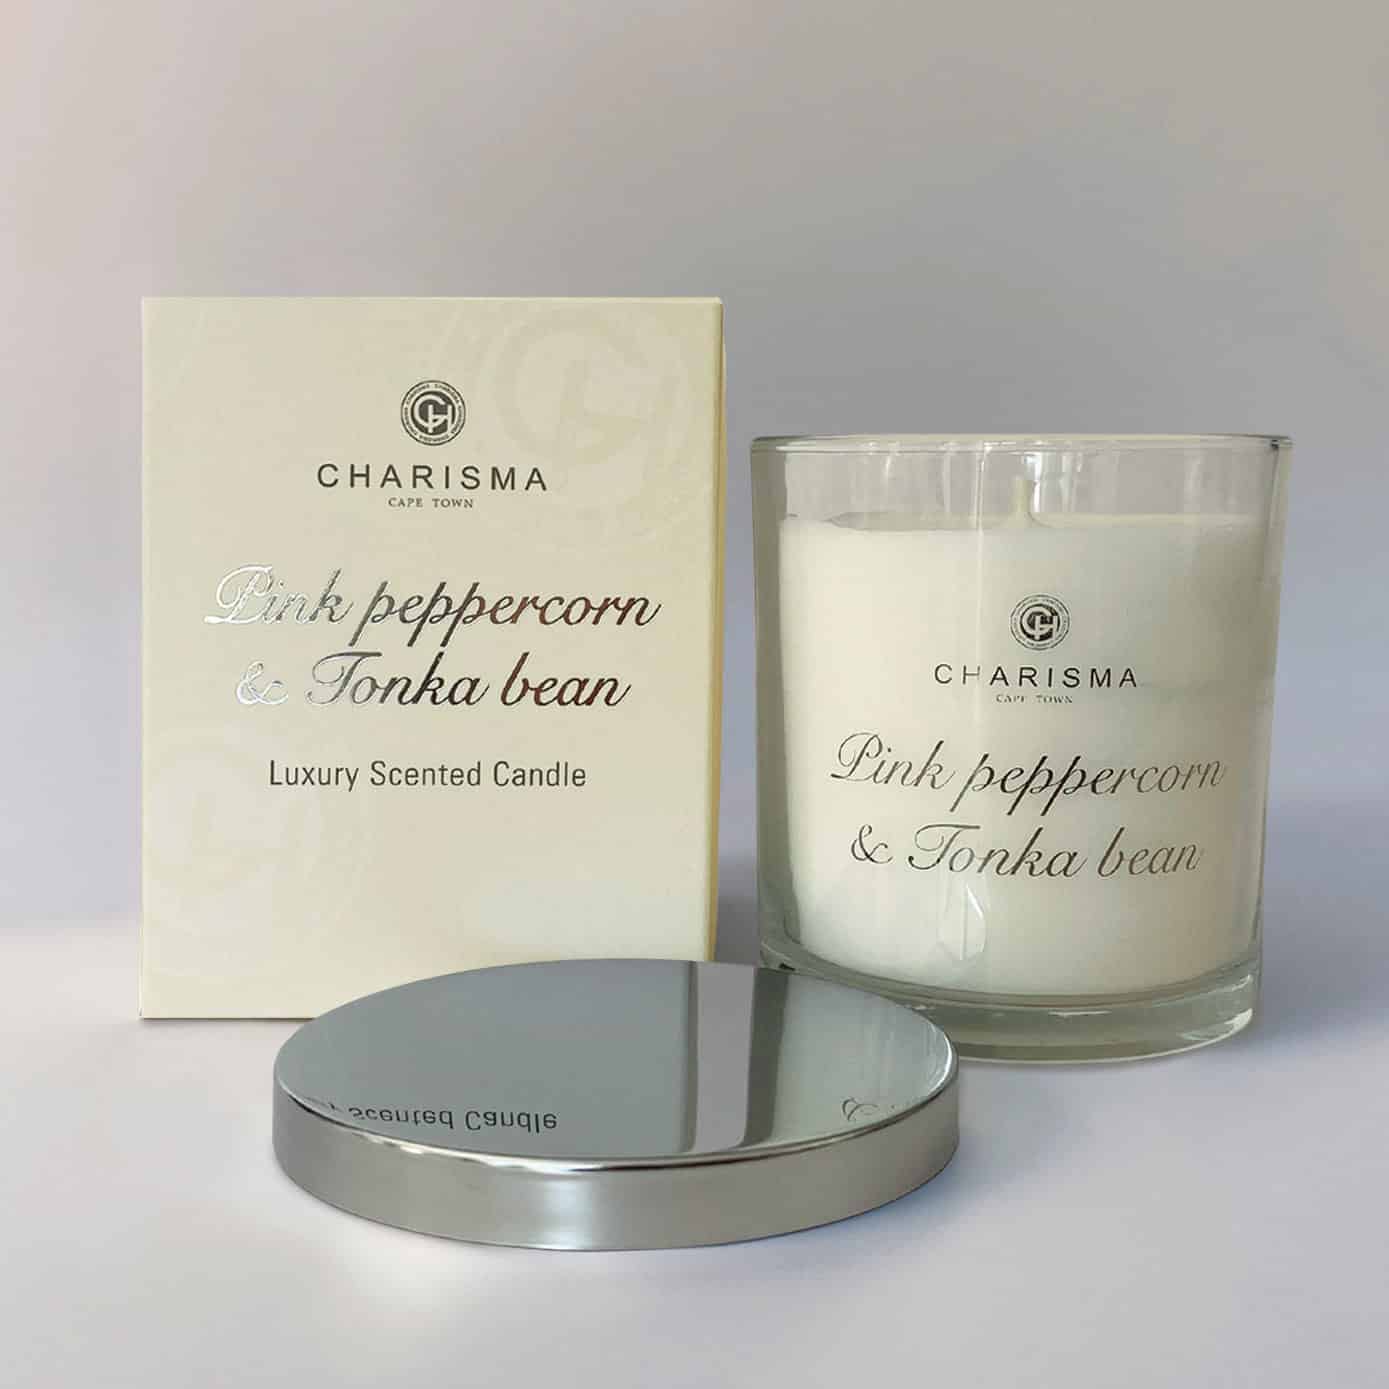 Charisma Pink Peppercorn Candle 255g